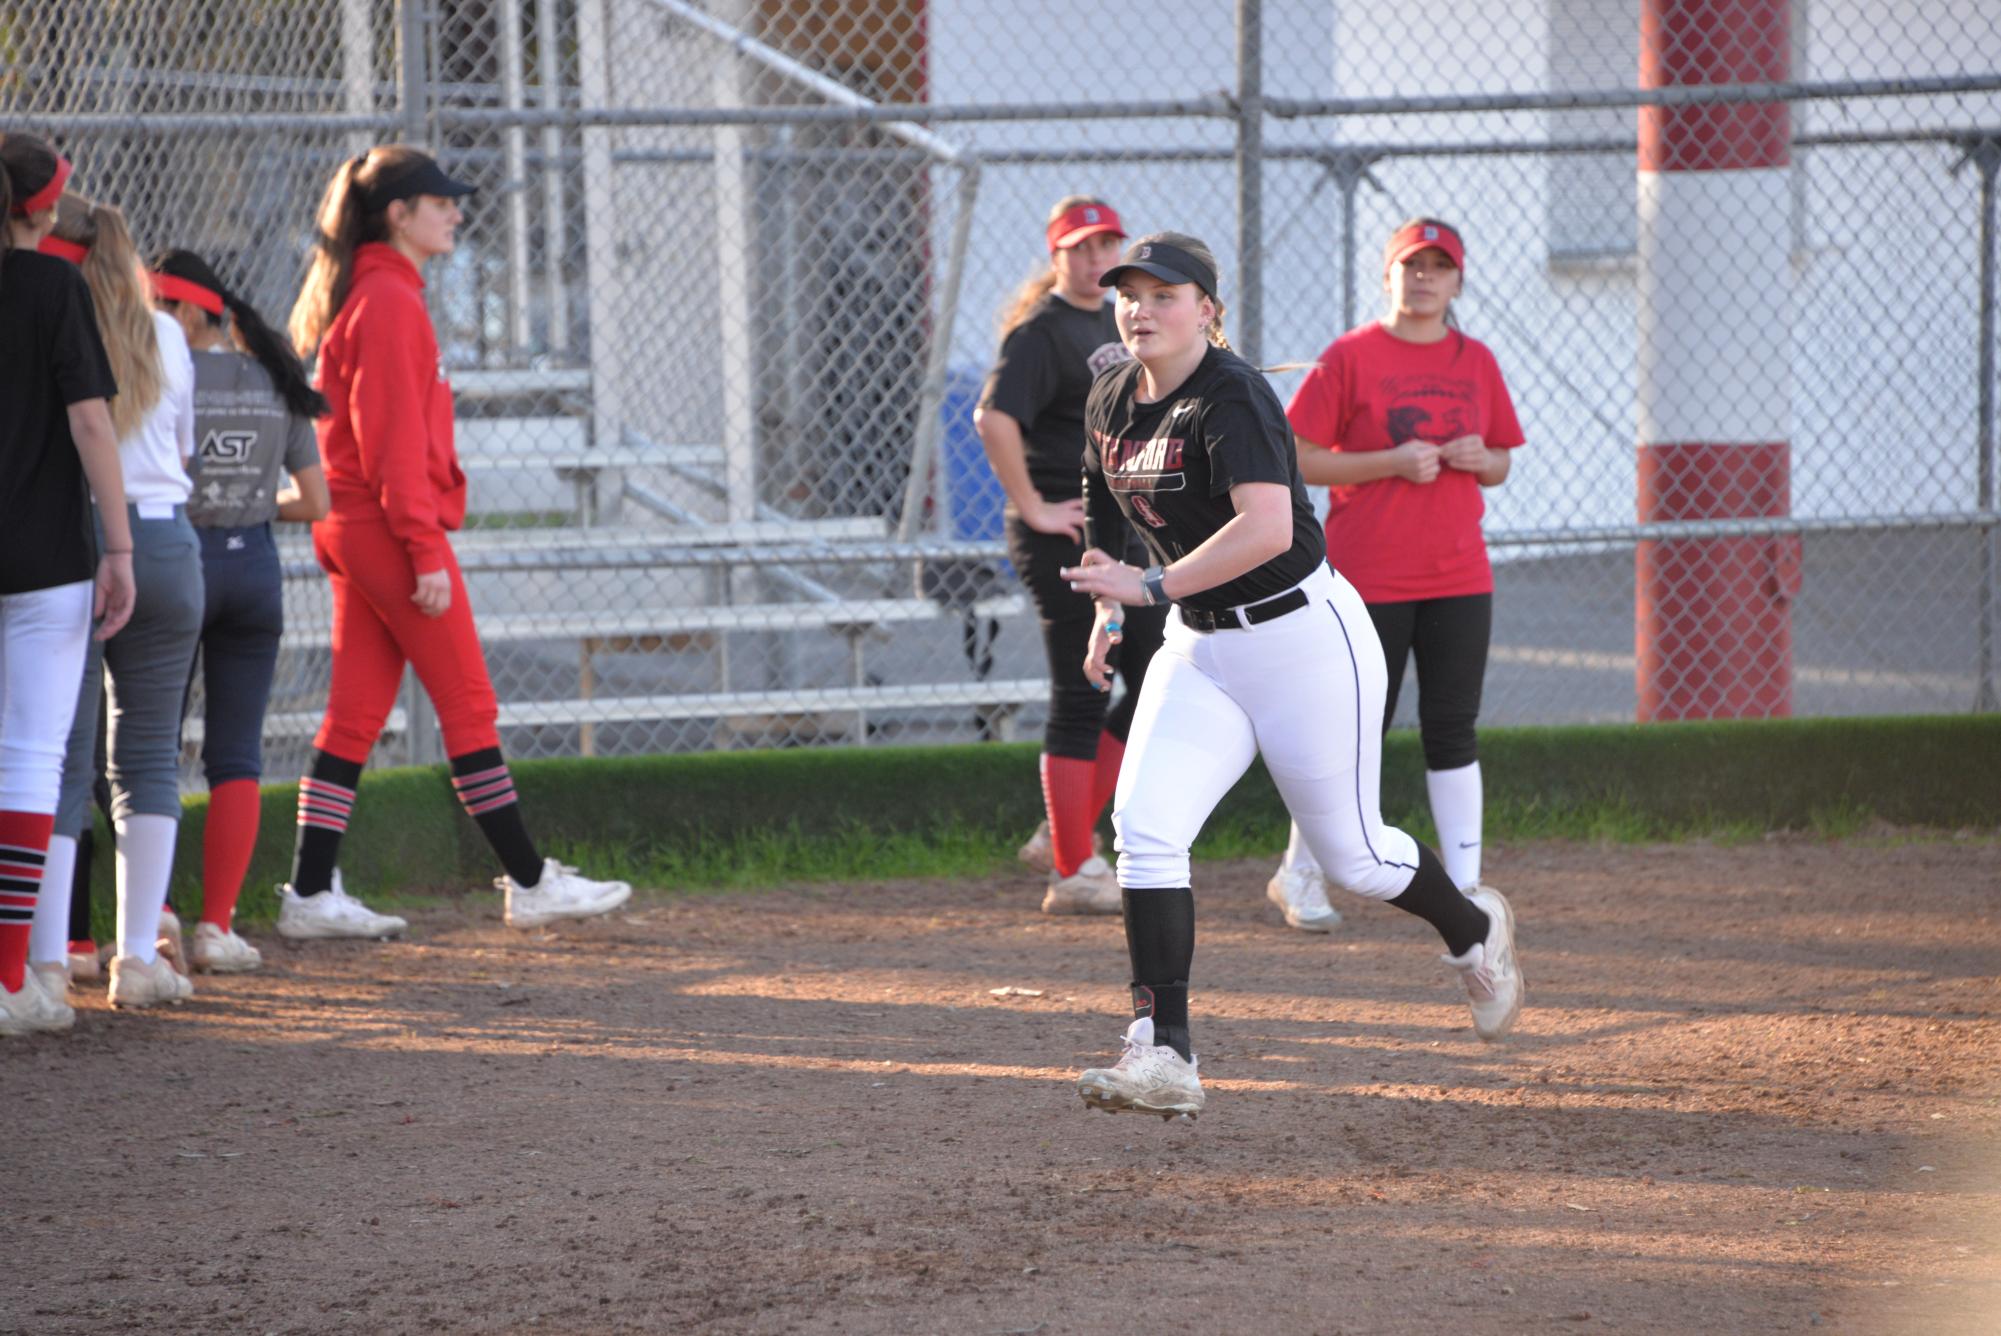 Senior Shayna Young runs the bases during practices with her team on Wednesday, Feb. 28.